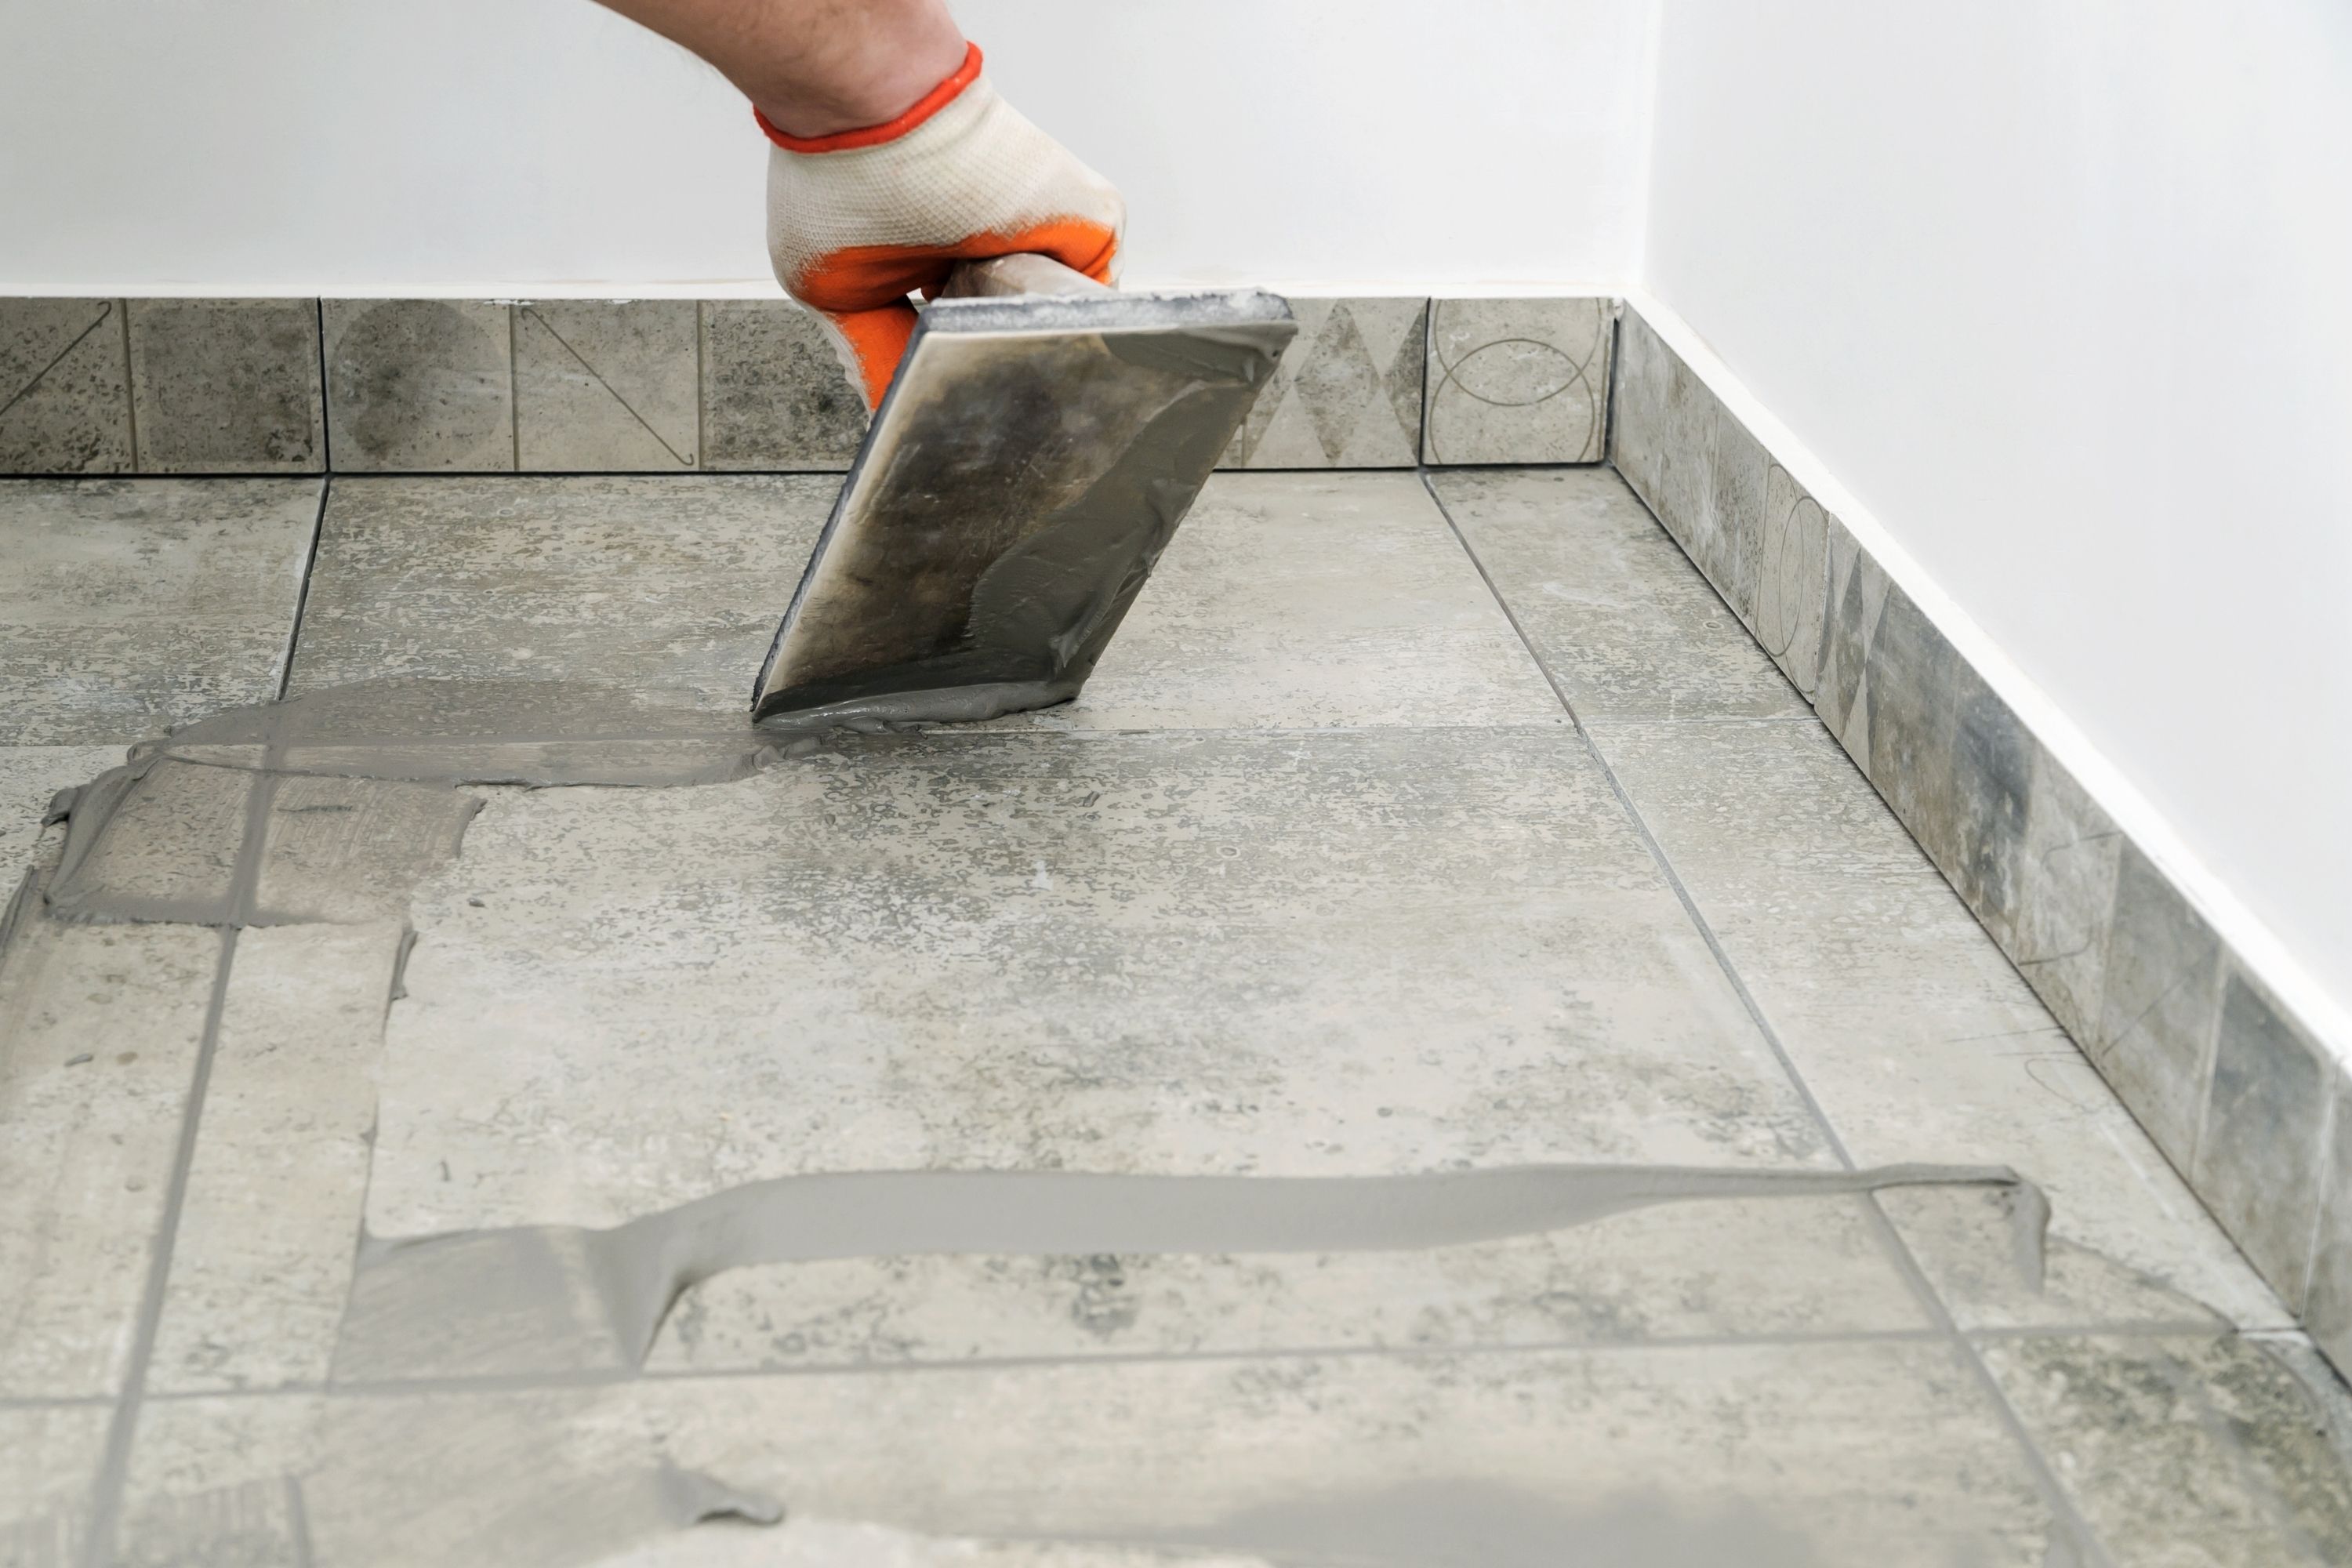 Extra Tips For Cleaning Paint Off Your Tile And Grout